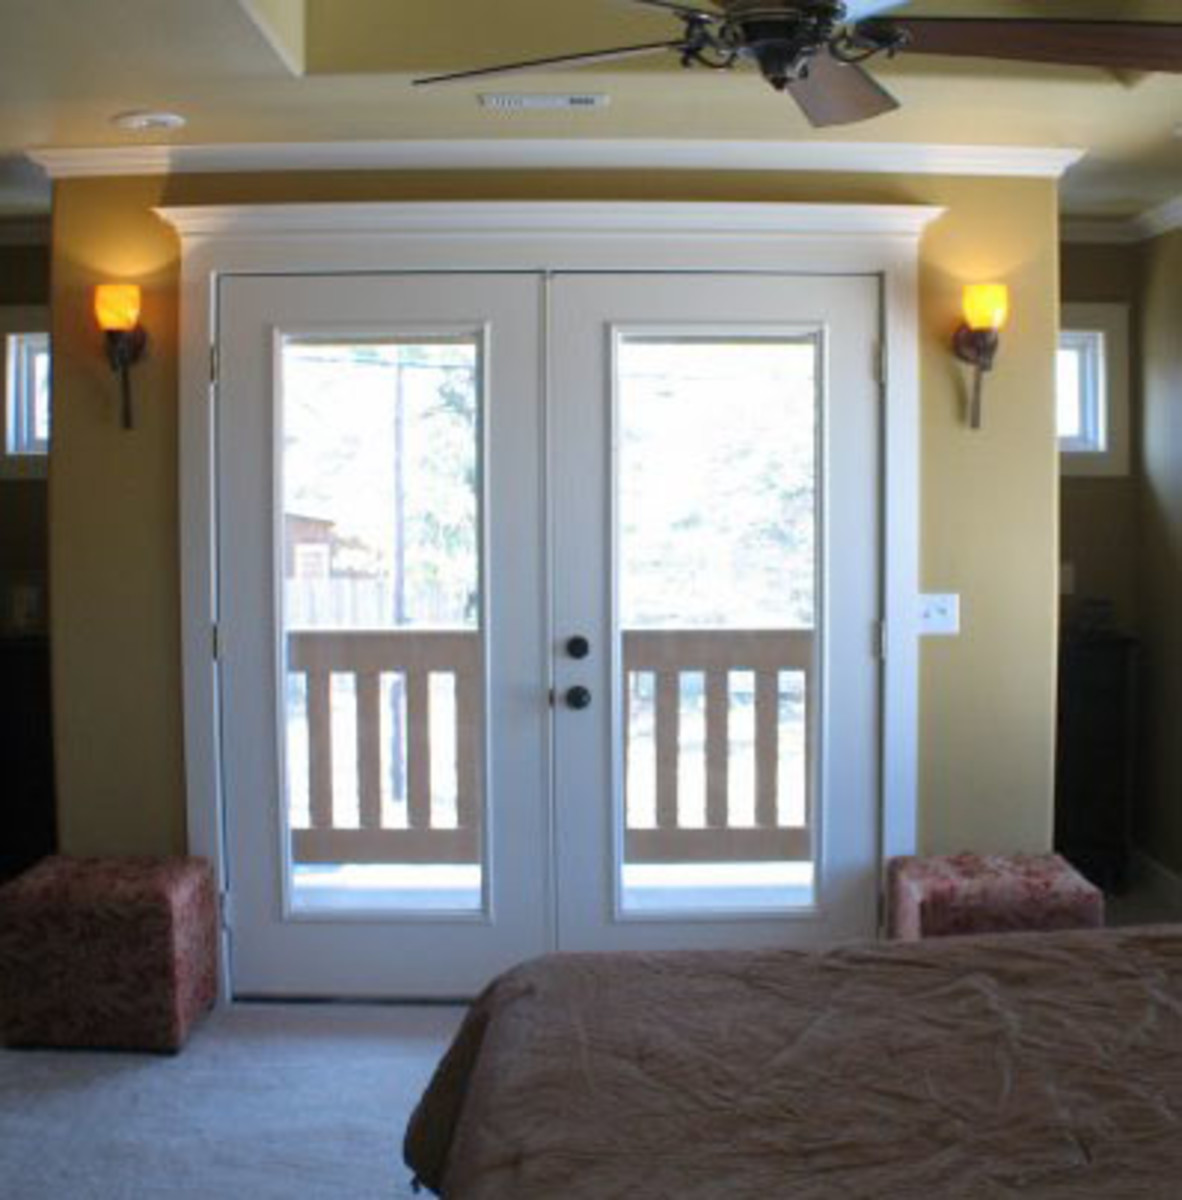 Double doors leading to balcony from master suite.  A second floor master suite was added on. Rather than extending the room the full length of the garage below, a few feet were stolen for a private balcony accessed via french doors.